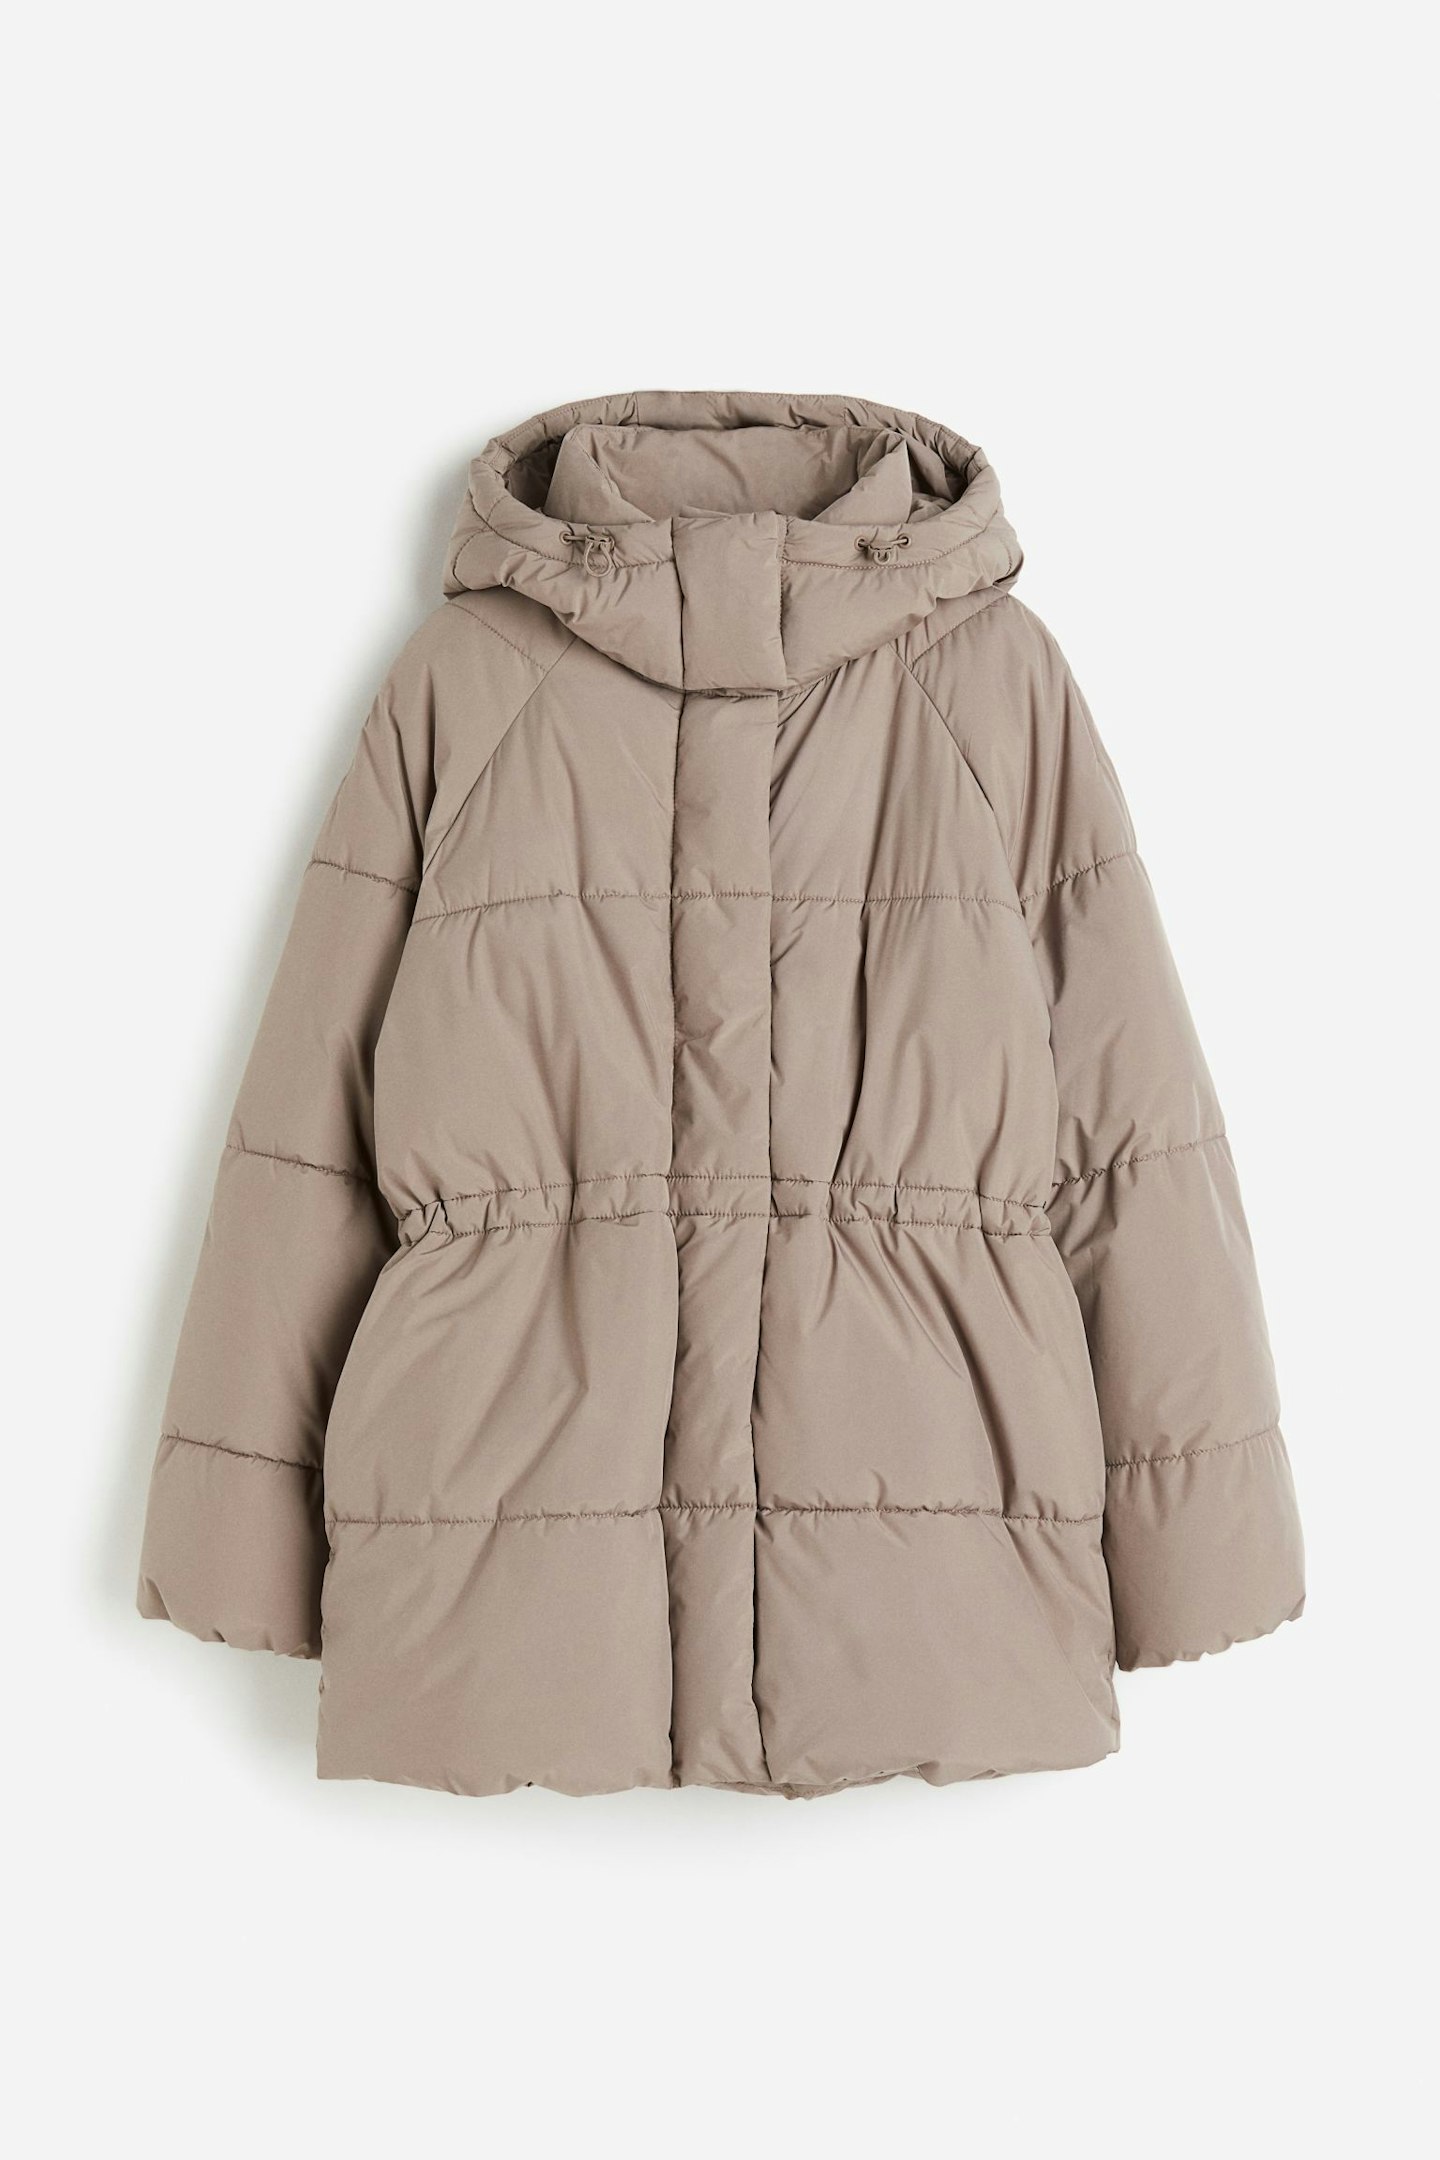 H&M Hooded Puffer Jacket